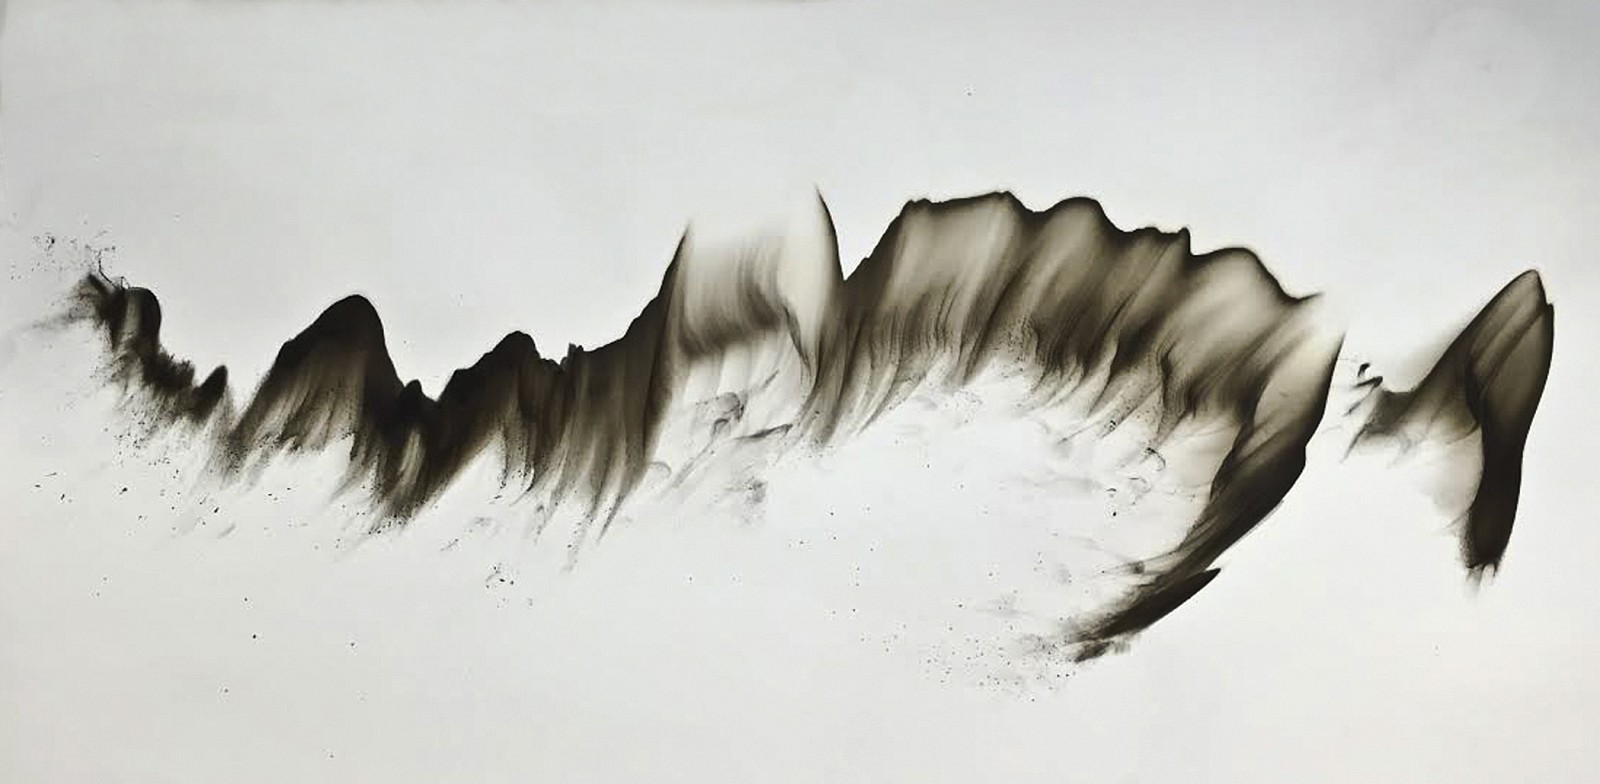 Dennis Lee Mitchell
Untitled 21, 2015
smoke directly applied to paper, 23 x 71 in.